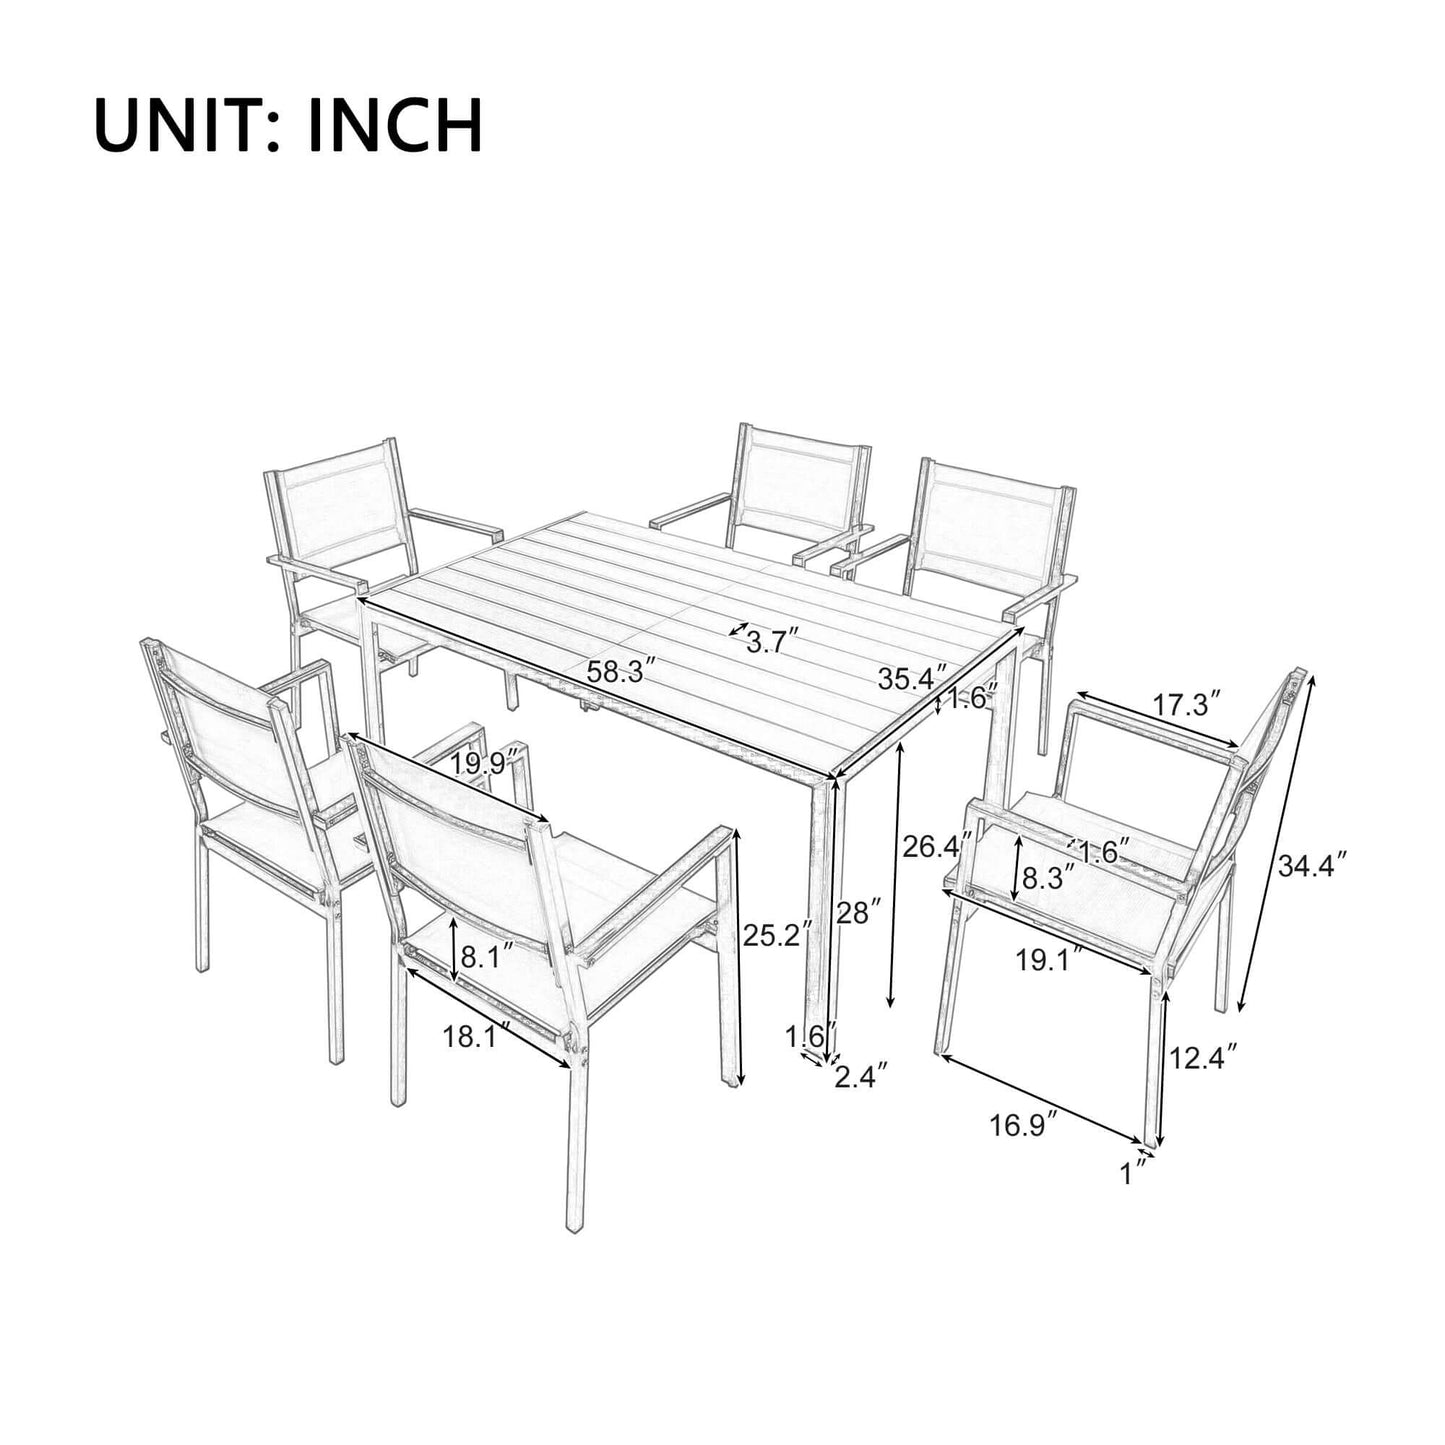 U-Style High-quality Steel Outdoor Table and Chair Set, black, seating for 6, suitable for patio, balcony, backyard, dimensions in inches